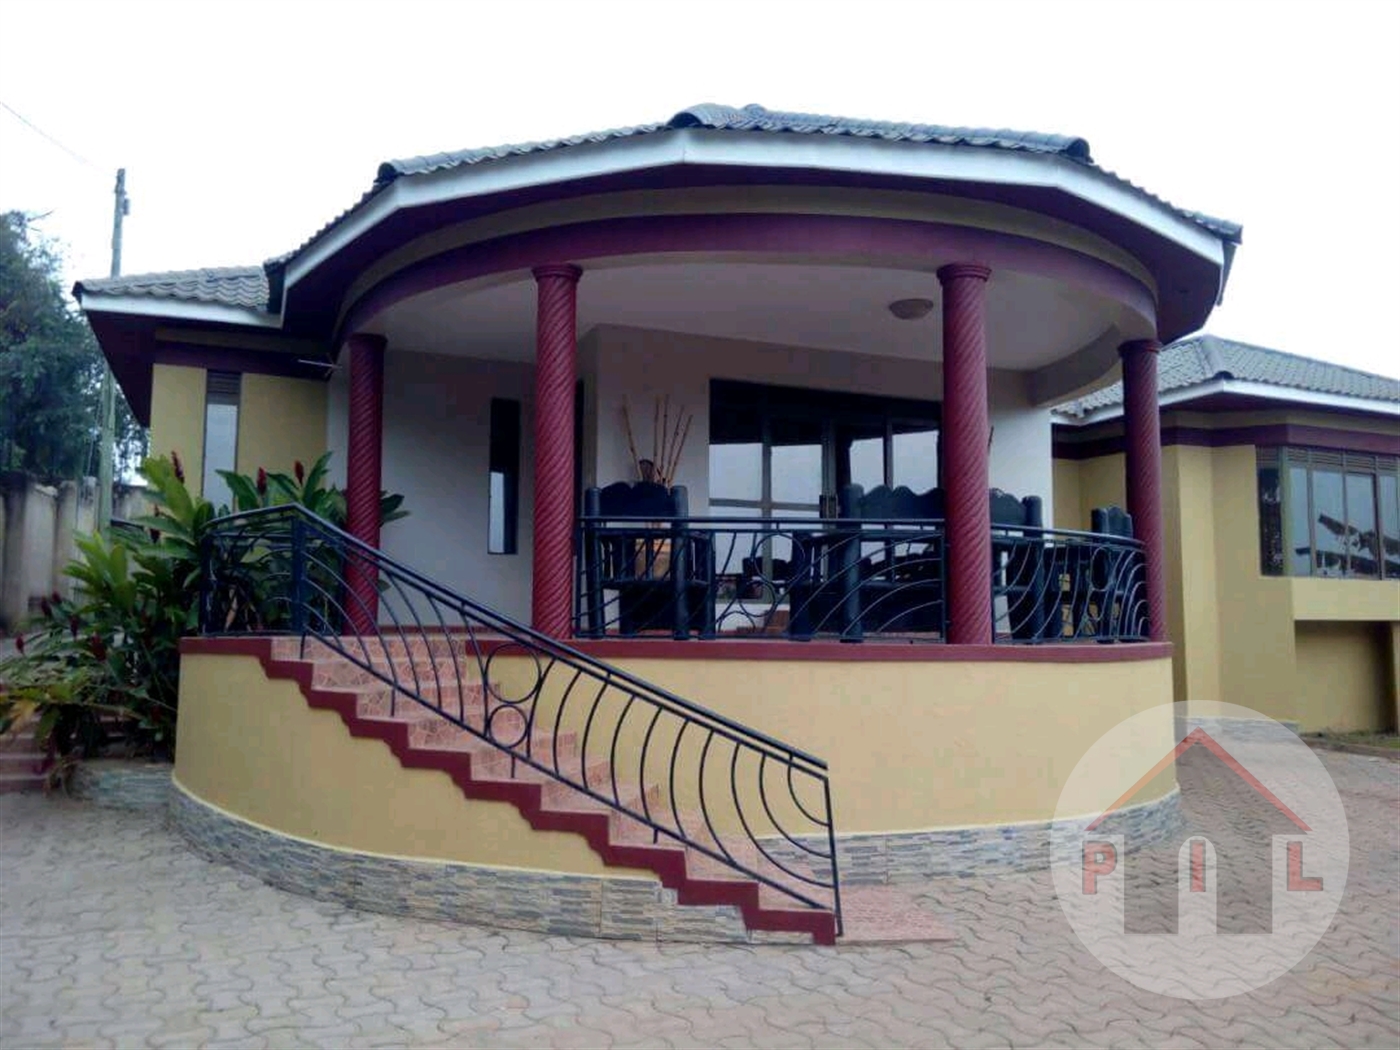 Mansion for rent in Kyanja Wakiso